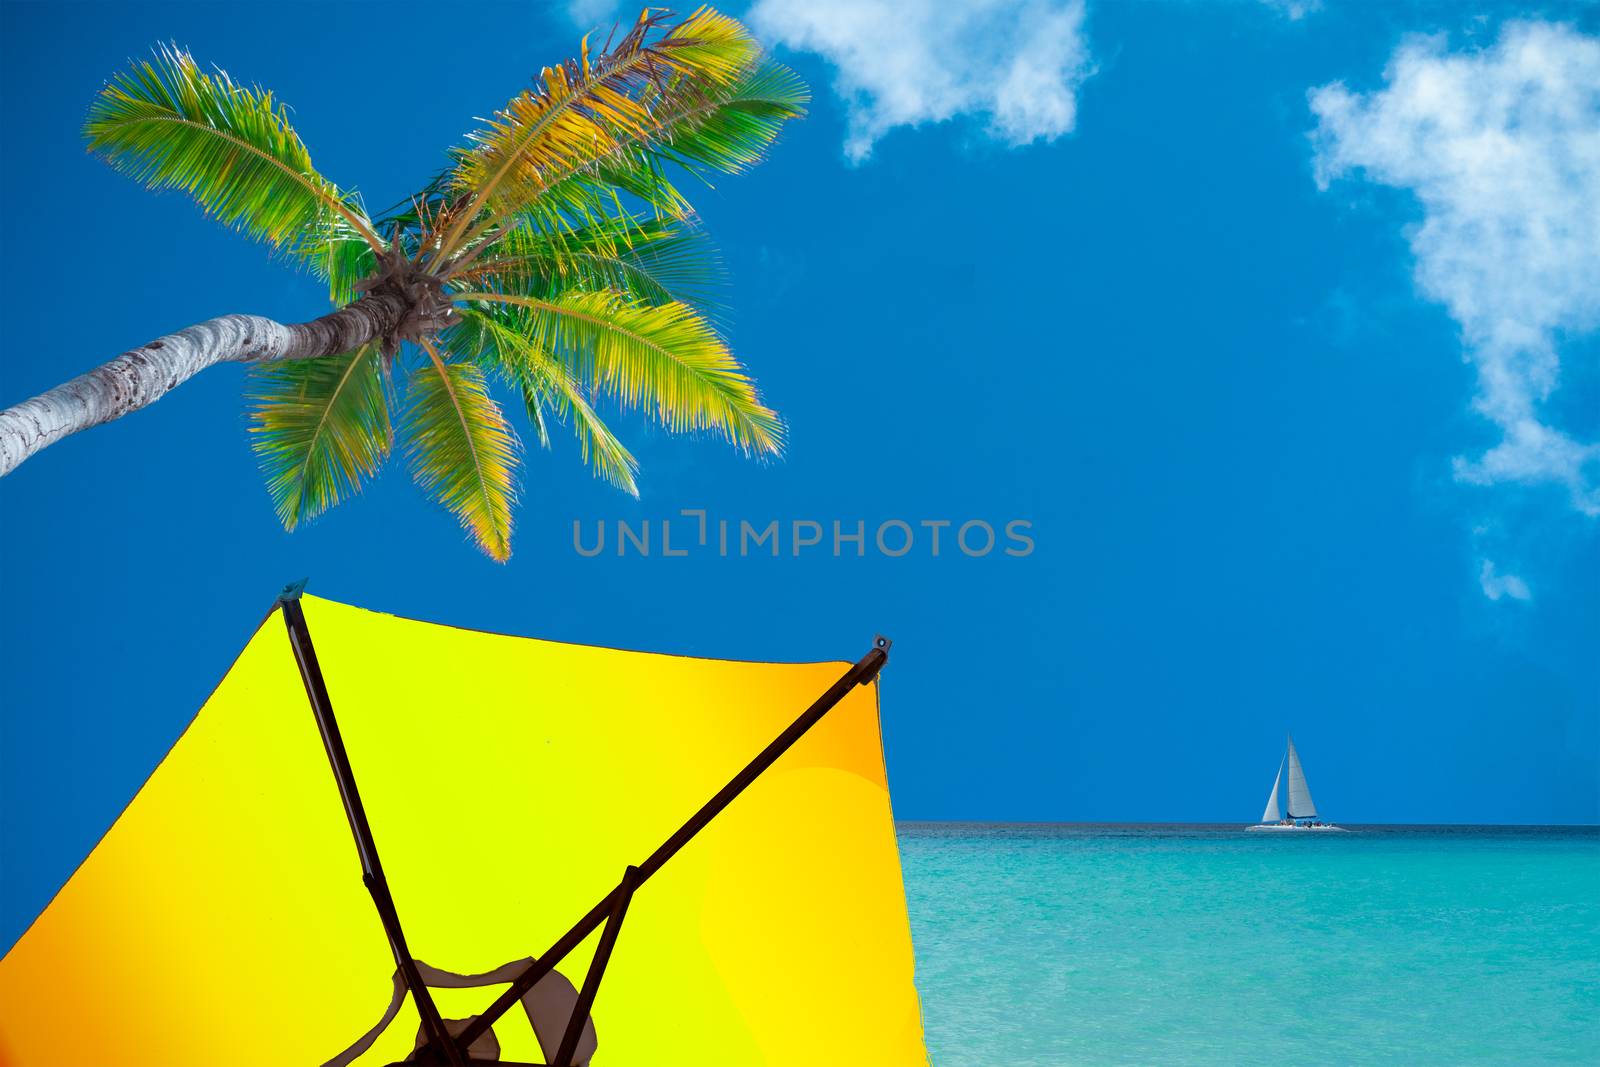 Umbrella under a palm tree and a sailboat on the horizon by ben44